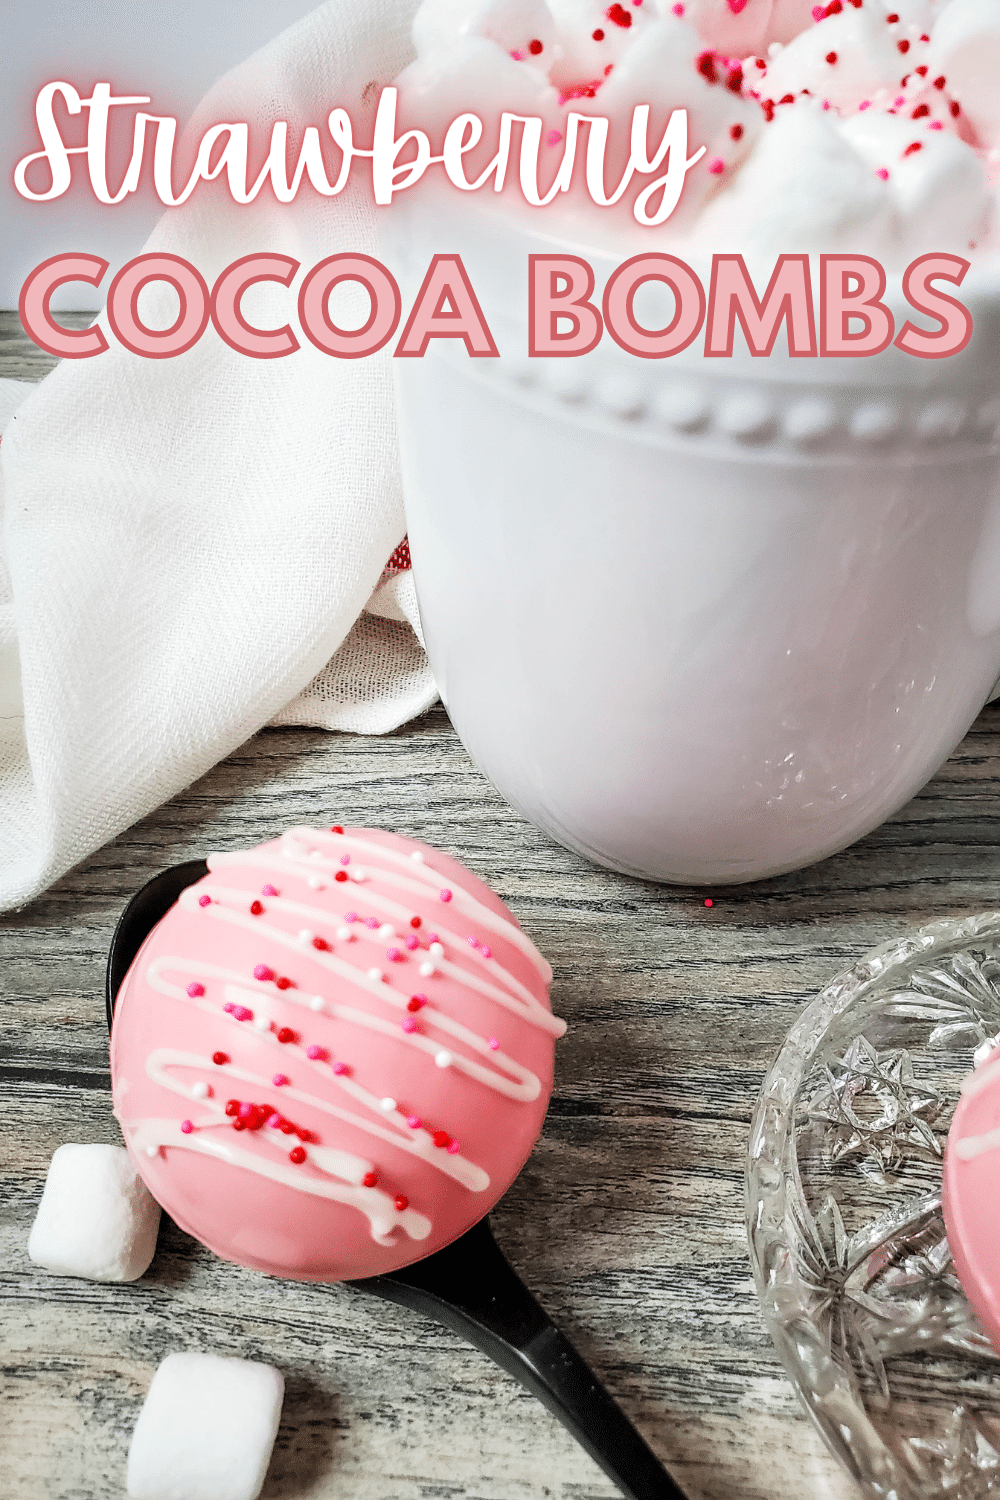 Strawberry Hot Cocoa Bombs on a spoon and a small glass plate next to a white mug of hot cocoa topped with marshmallows and red and pink sprinkles with a text at the upper part of the image saying Strawberry Cocoa Bombs.